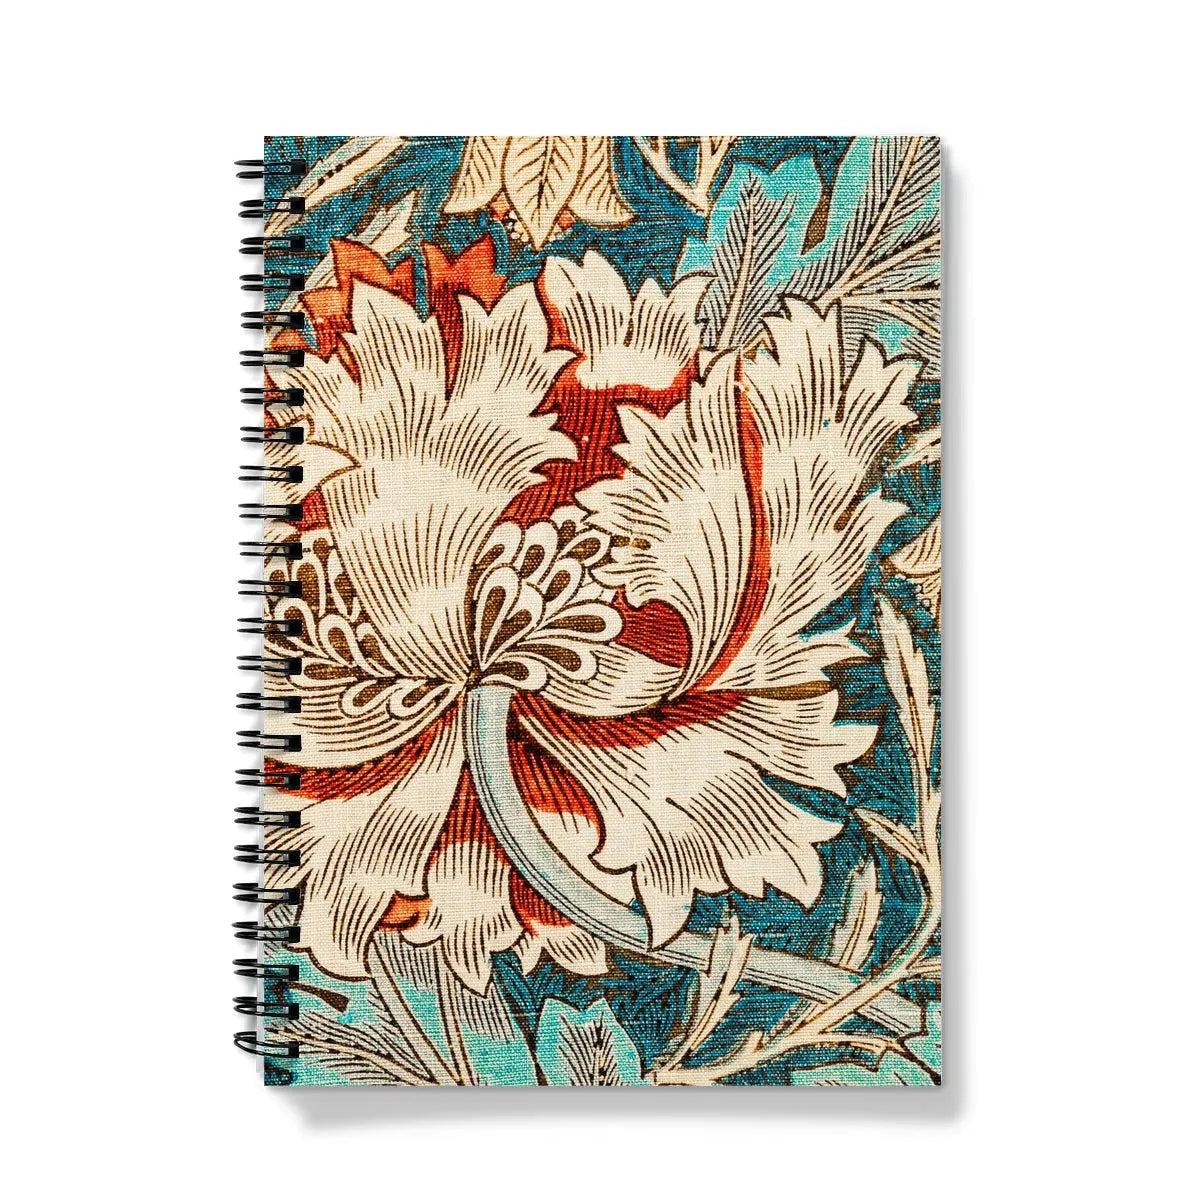 Honeysuckle Too By William Morris Notebook - A5 - Graph Paper - Notebooks & Notepads - Aesthetic Art